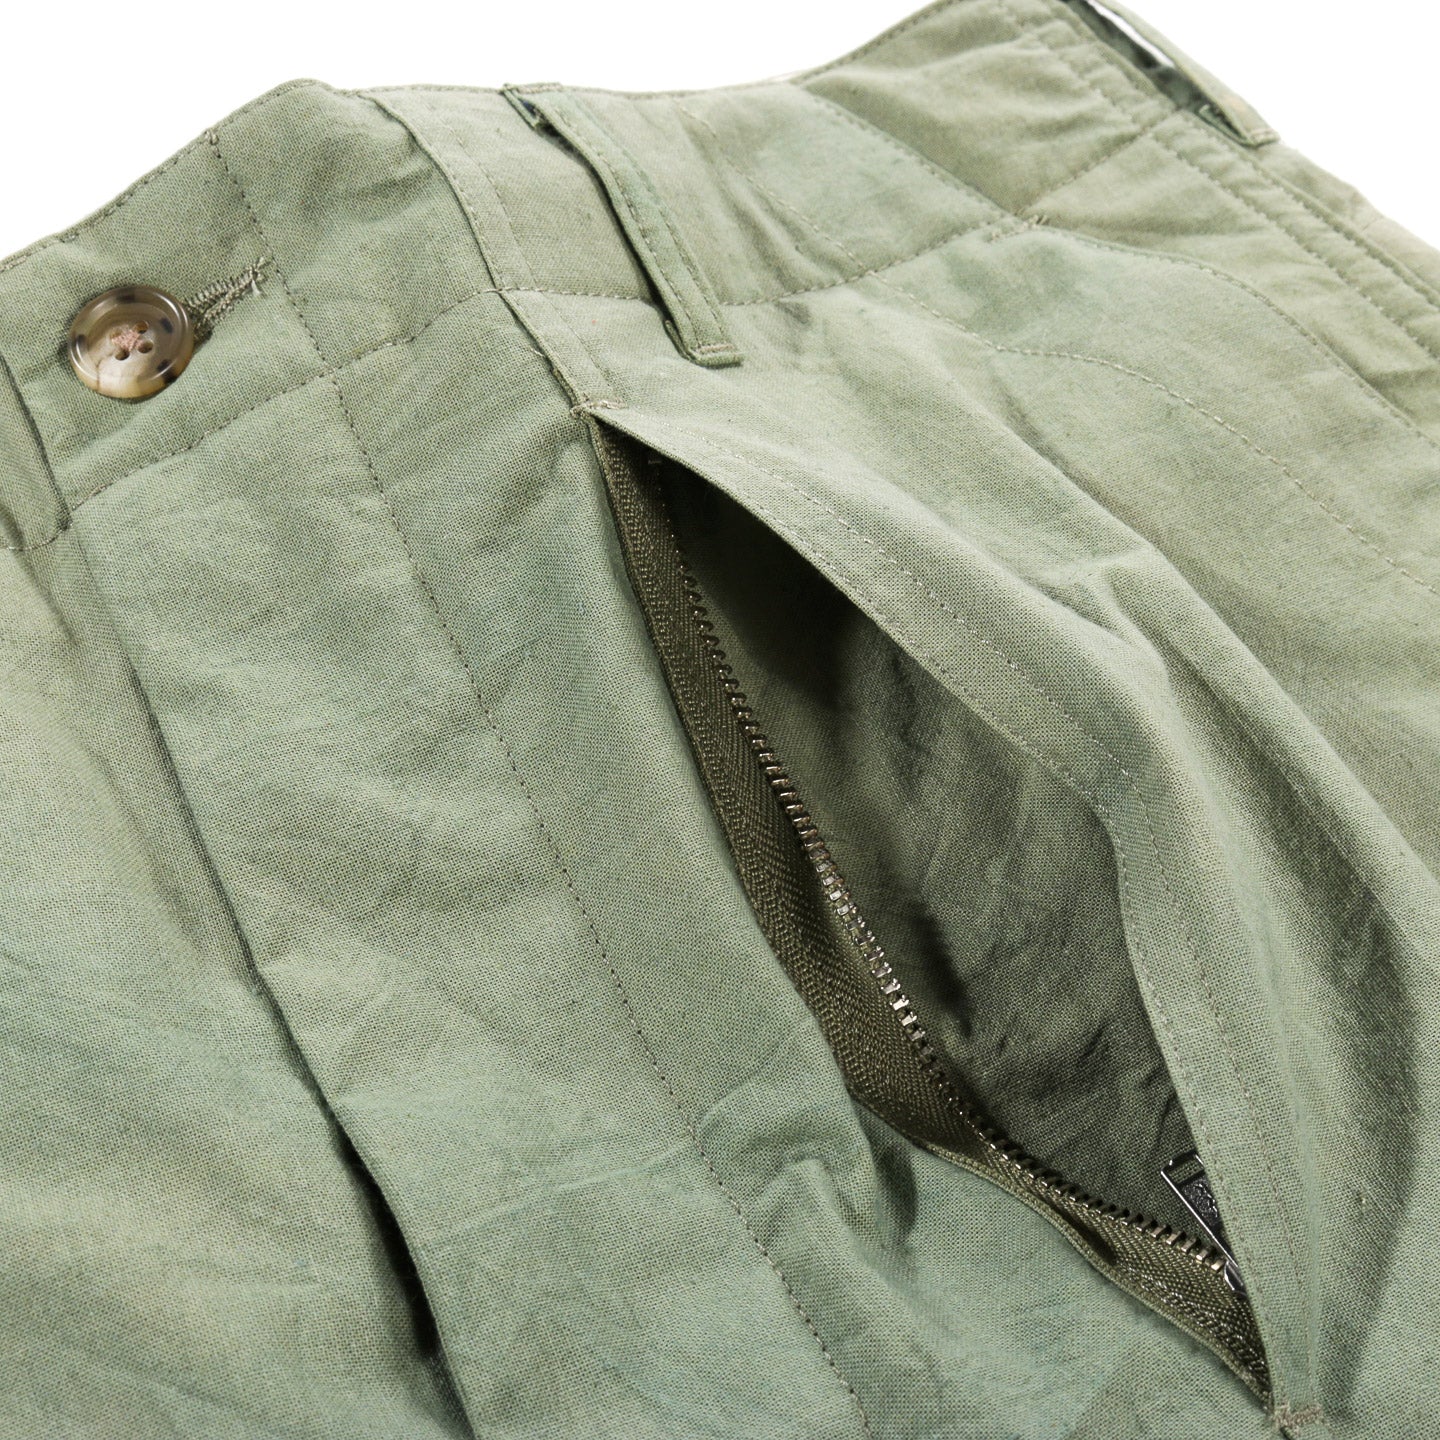 ENGINEERED GARMENTS FATIGUE SHORT OLIVE COTTON SHEETING